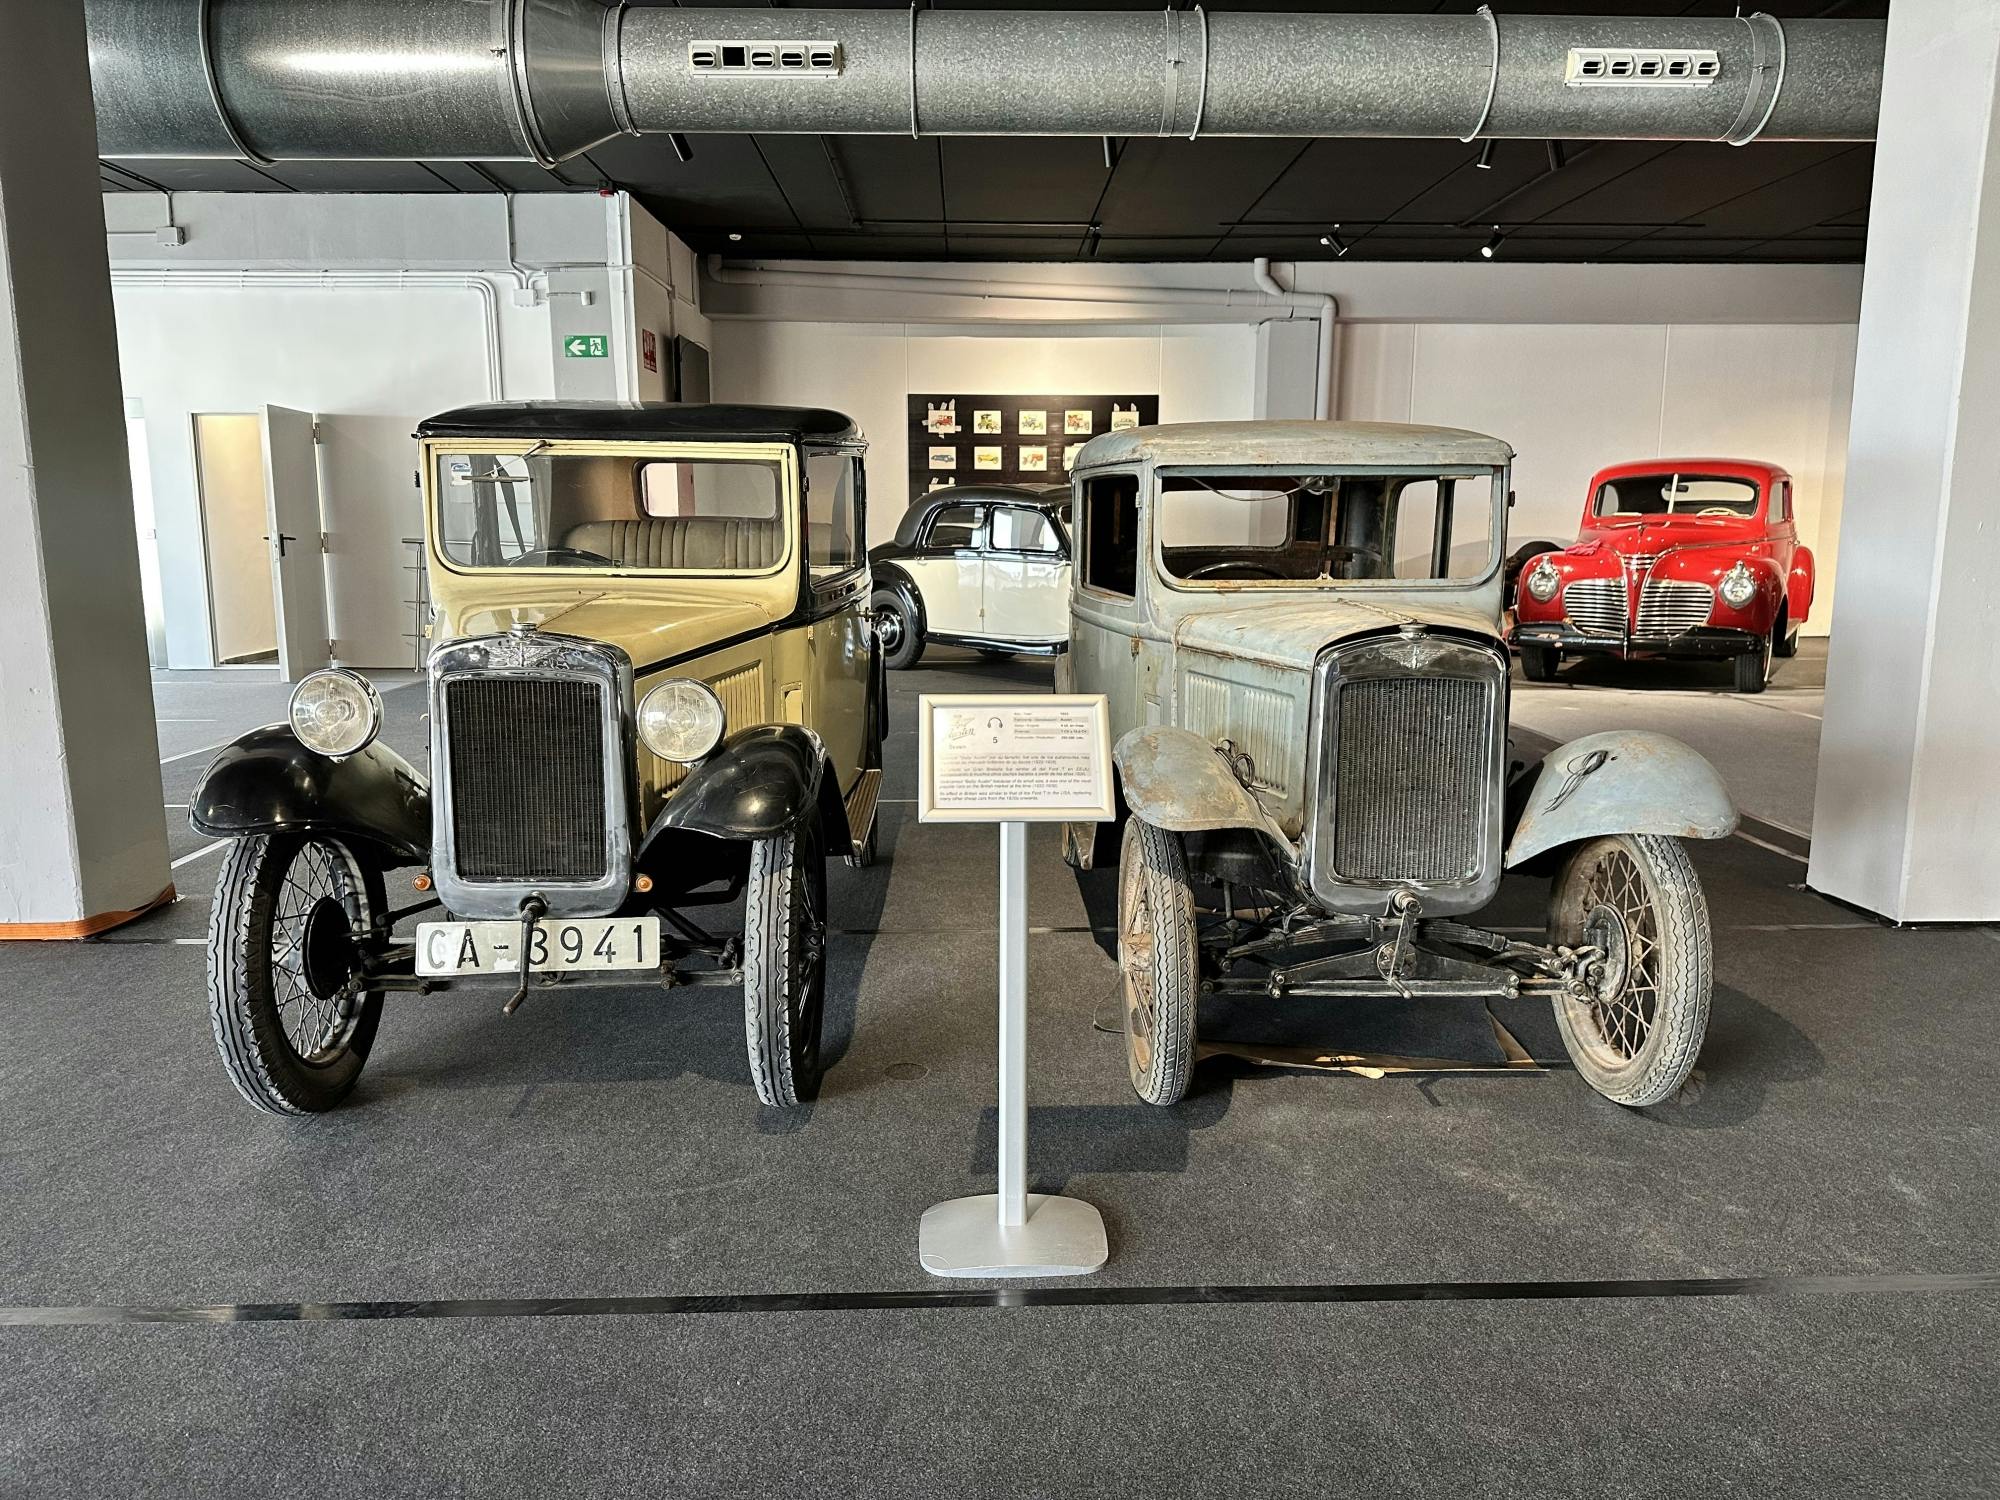 Entrance tickets for the Motor Museum in Finestrat Musement